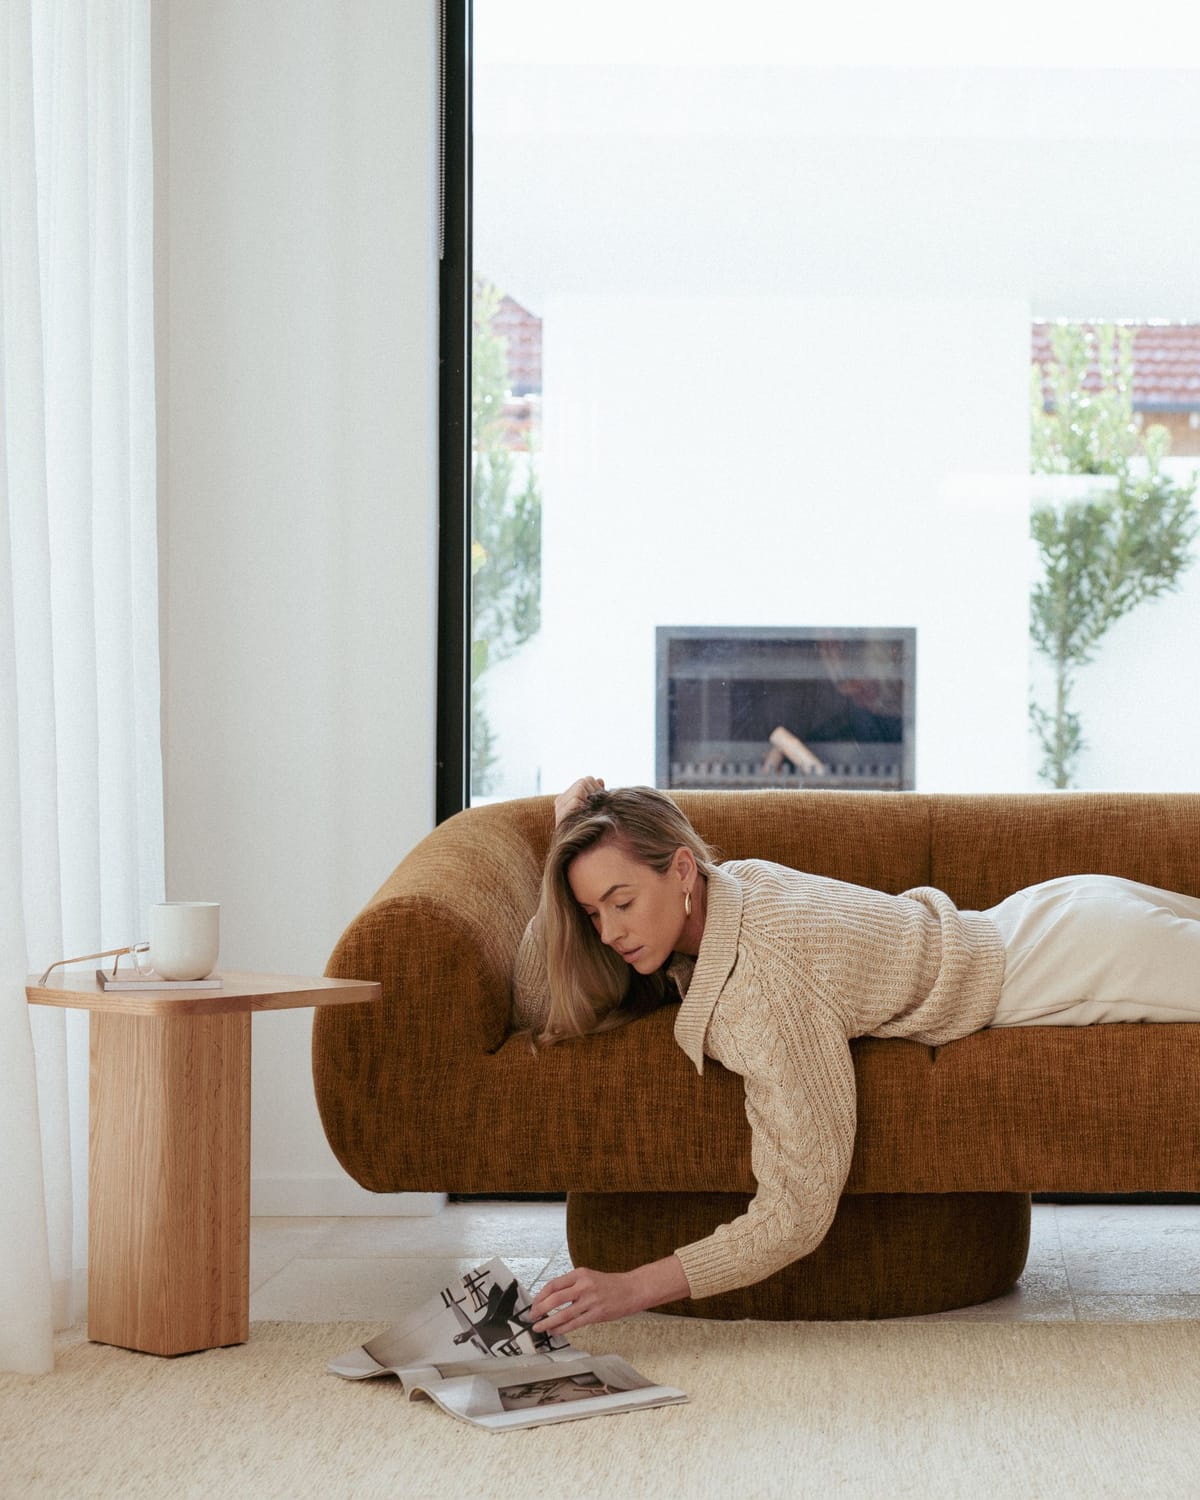 A model laying on a Made Furniture sofa reading a magazine with a timber side table to the side and a cream rug